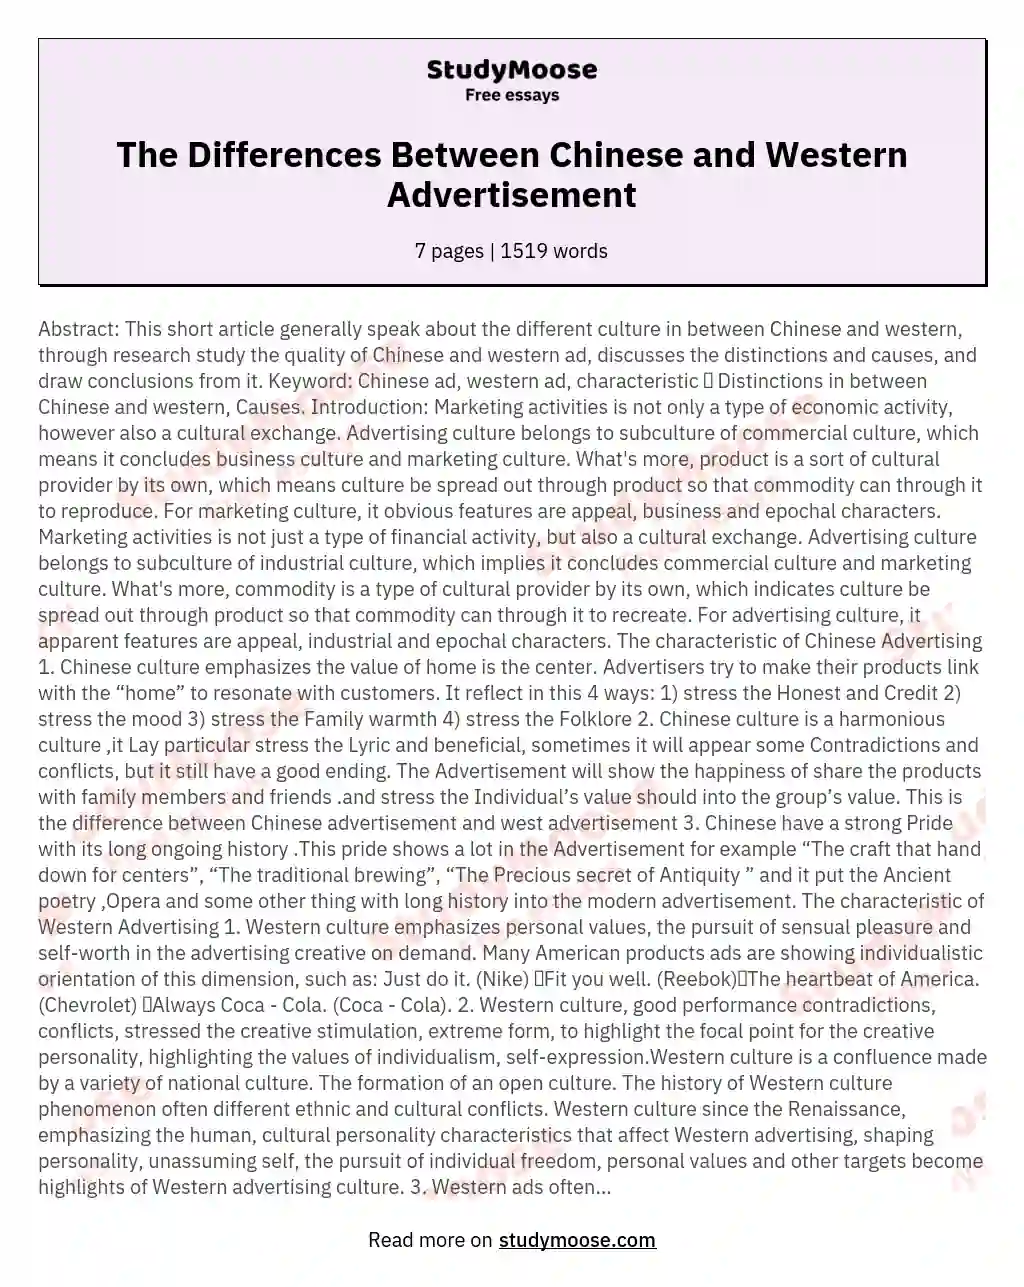 The Differences Between Chinese and Western Advertisement